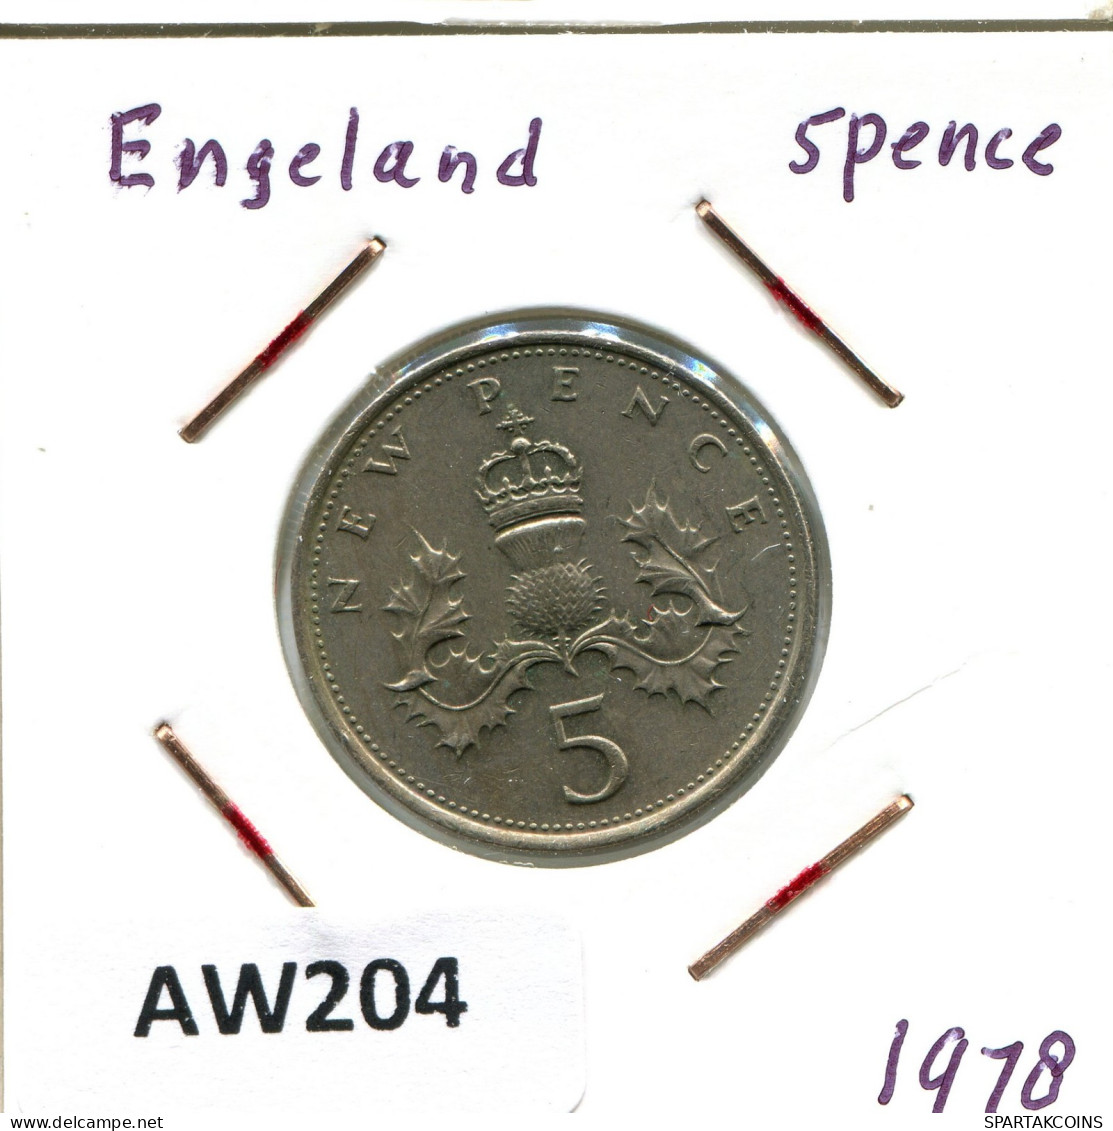 5 NEW PENCE 1978 UK GREAT BRITAIN Coin #AW204.U.A - 5 Pence & 5 New Pence